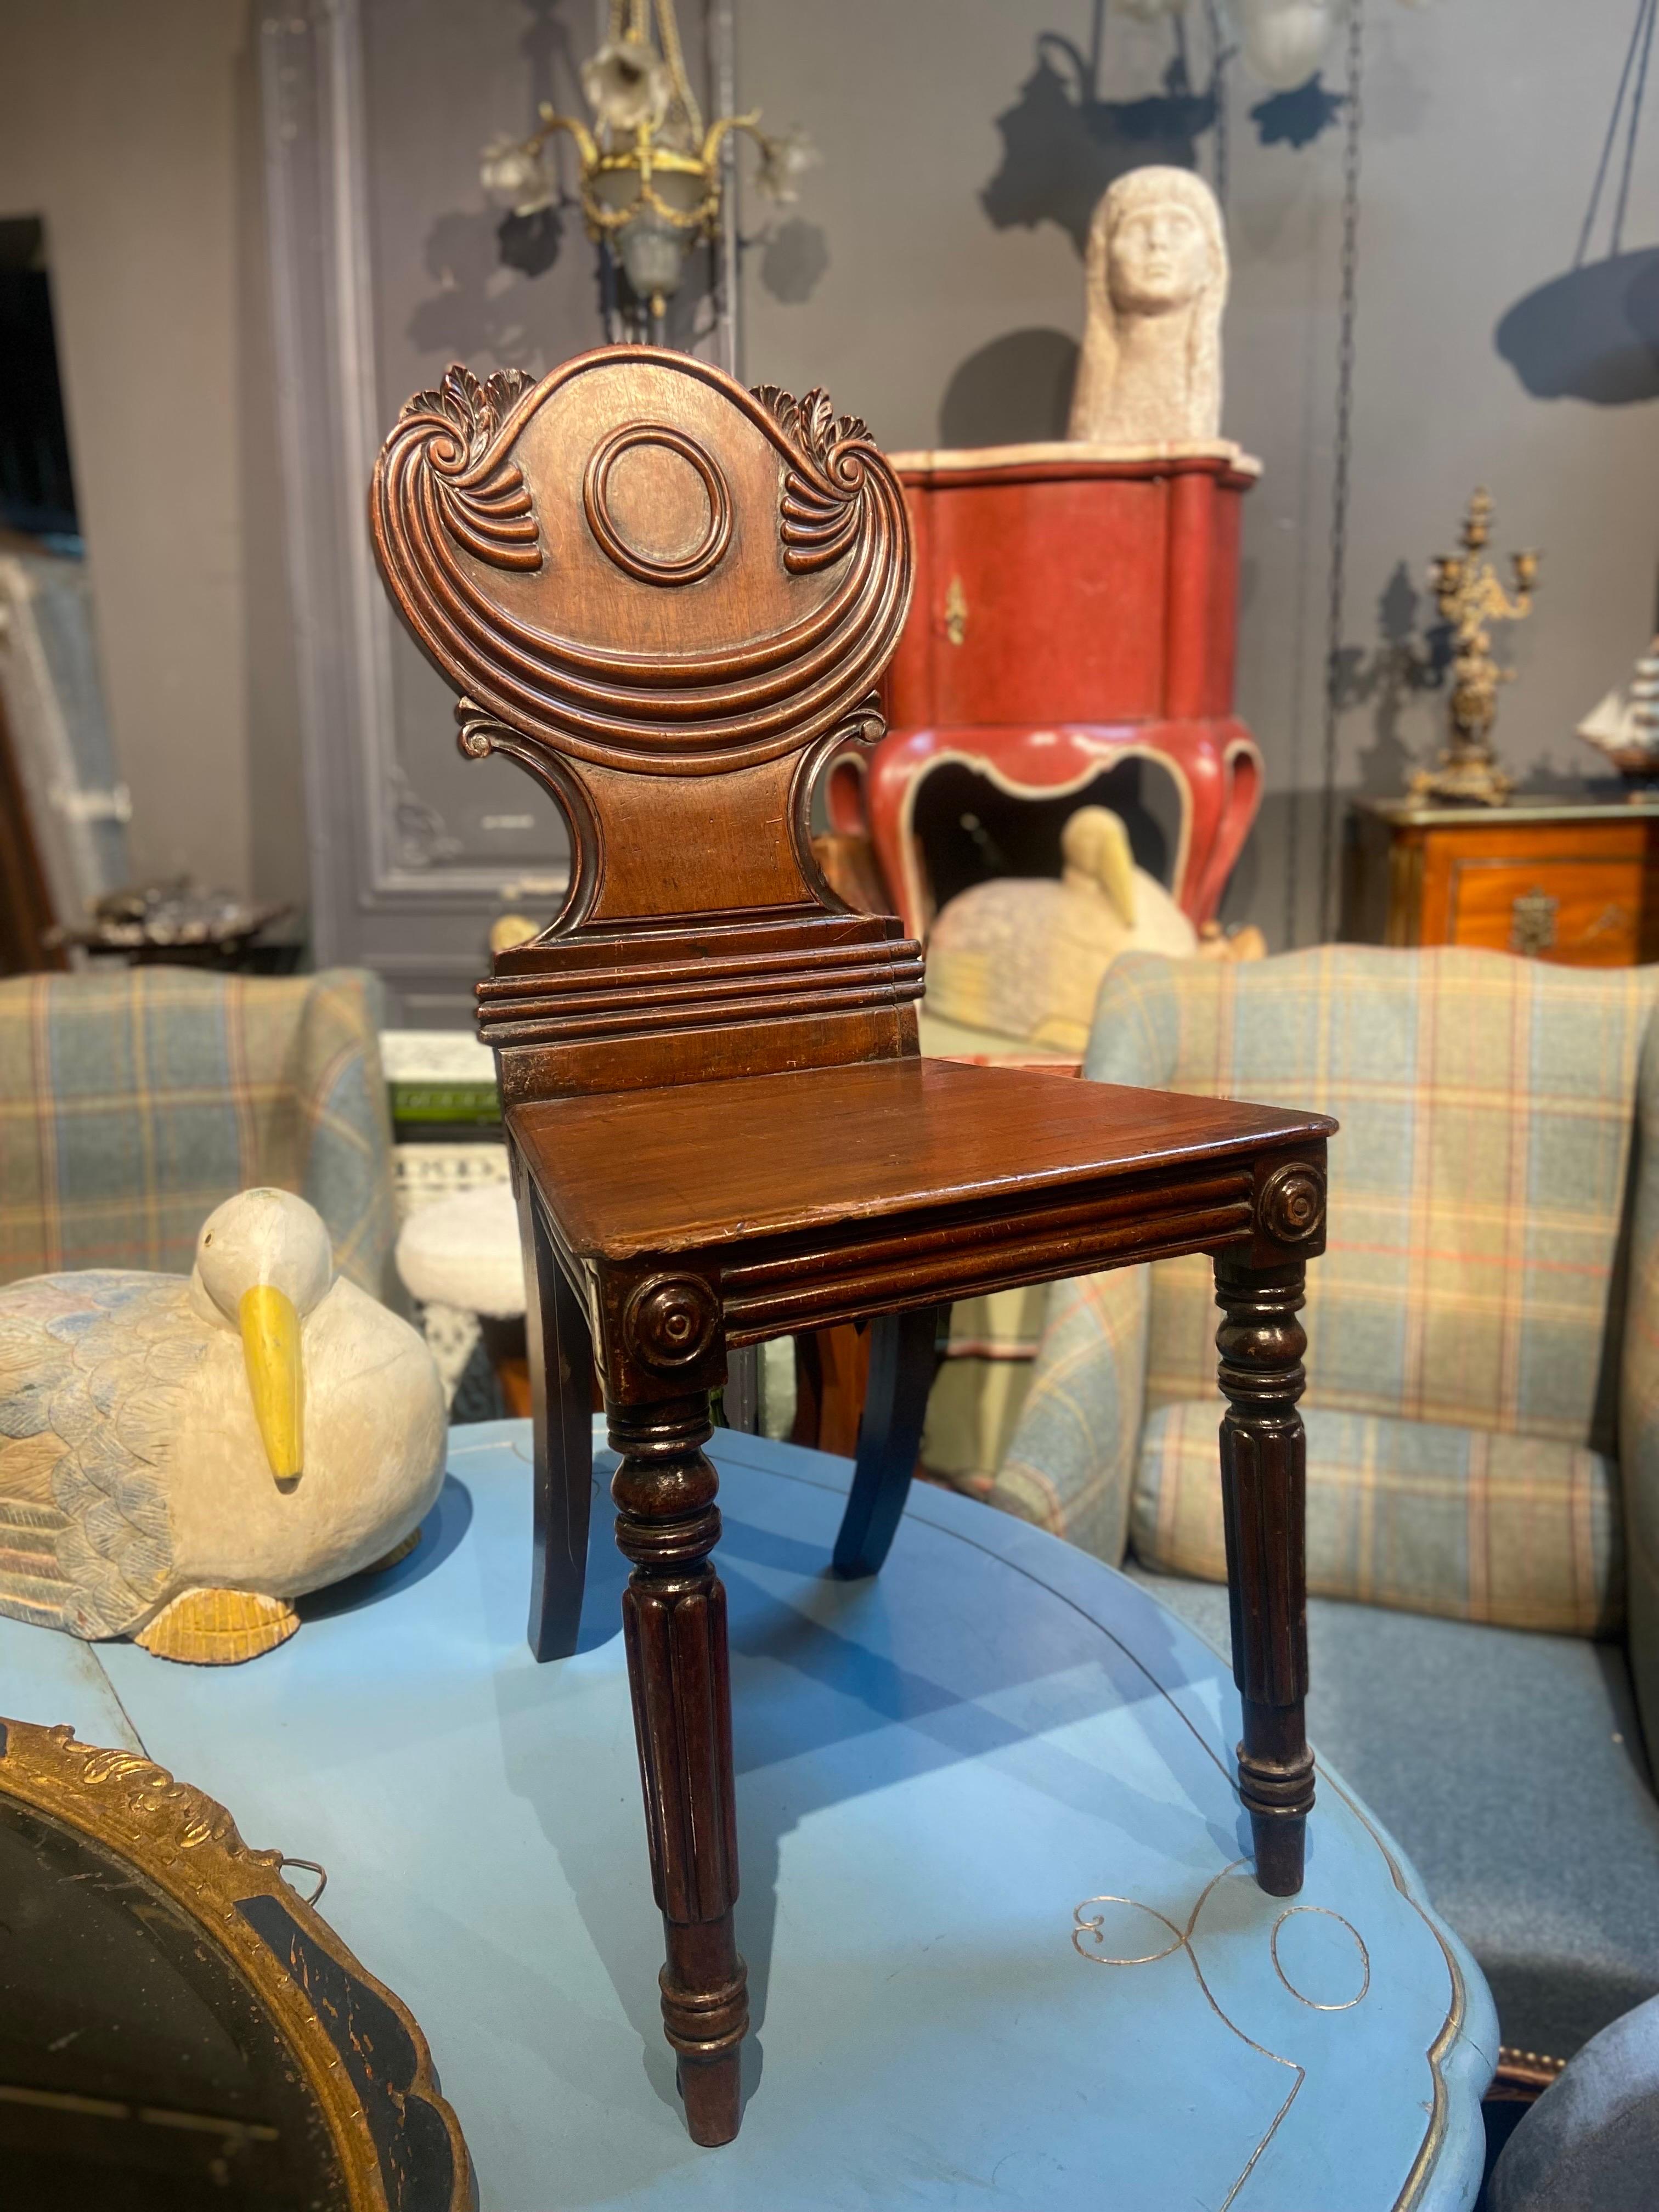 Attractive nineteenth century mahogany hall chair. Hand carved oval back with lovely elegant decorations and a seat raised on turned reeded legs.
England, circa 1880.